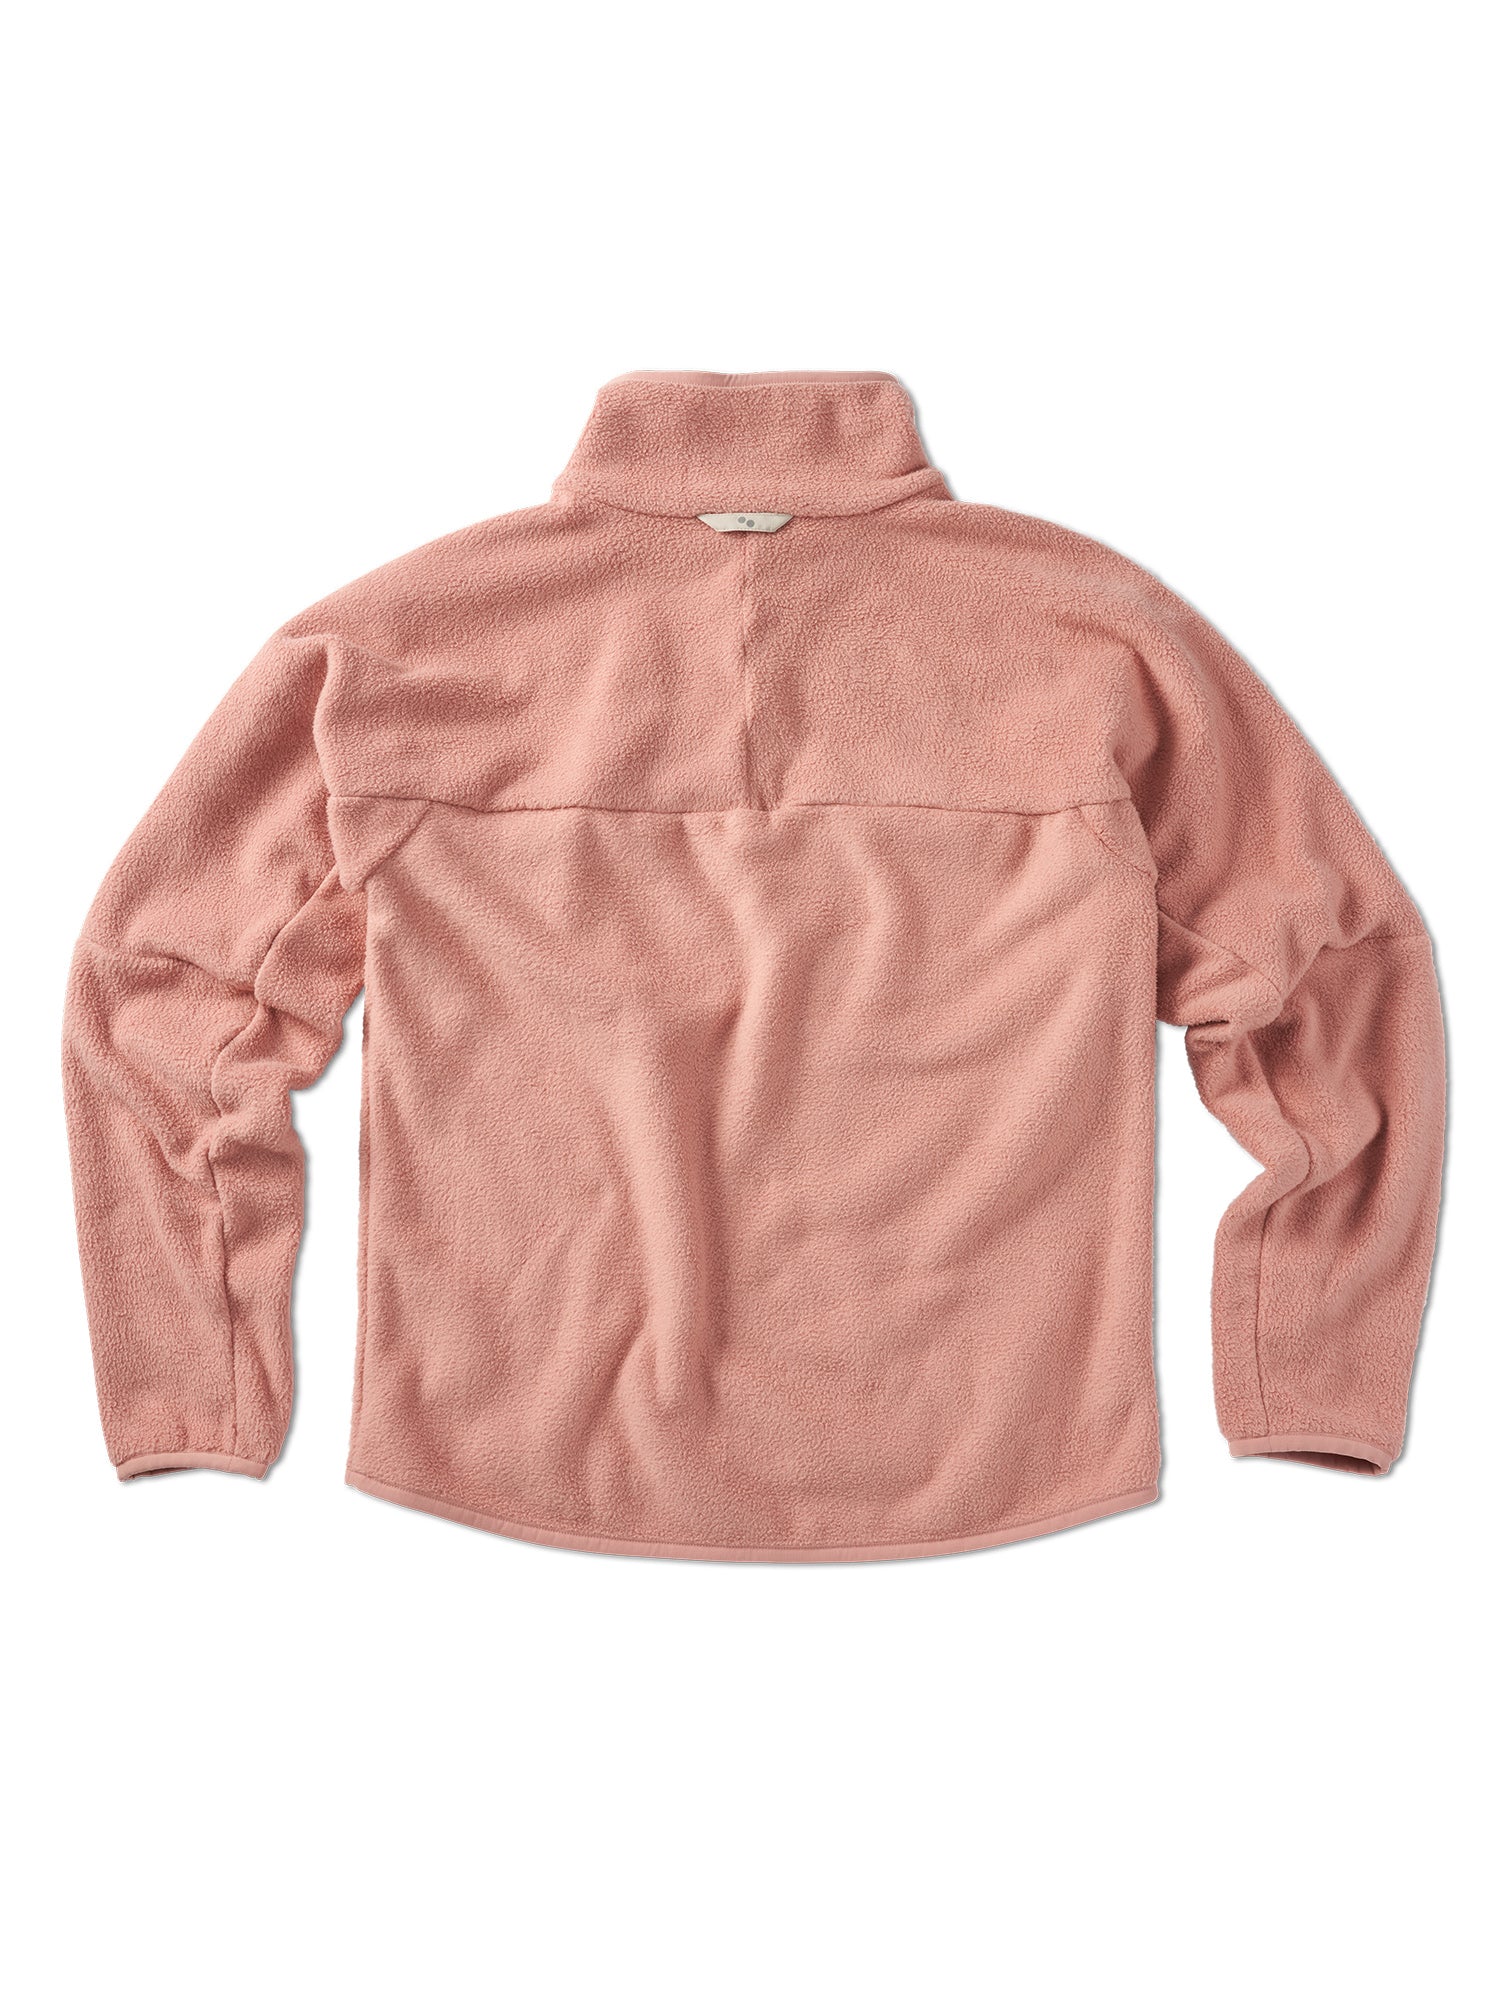 Fleece Pullover - Soft, warm and sustainable ✓ – pinqponq